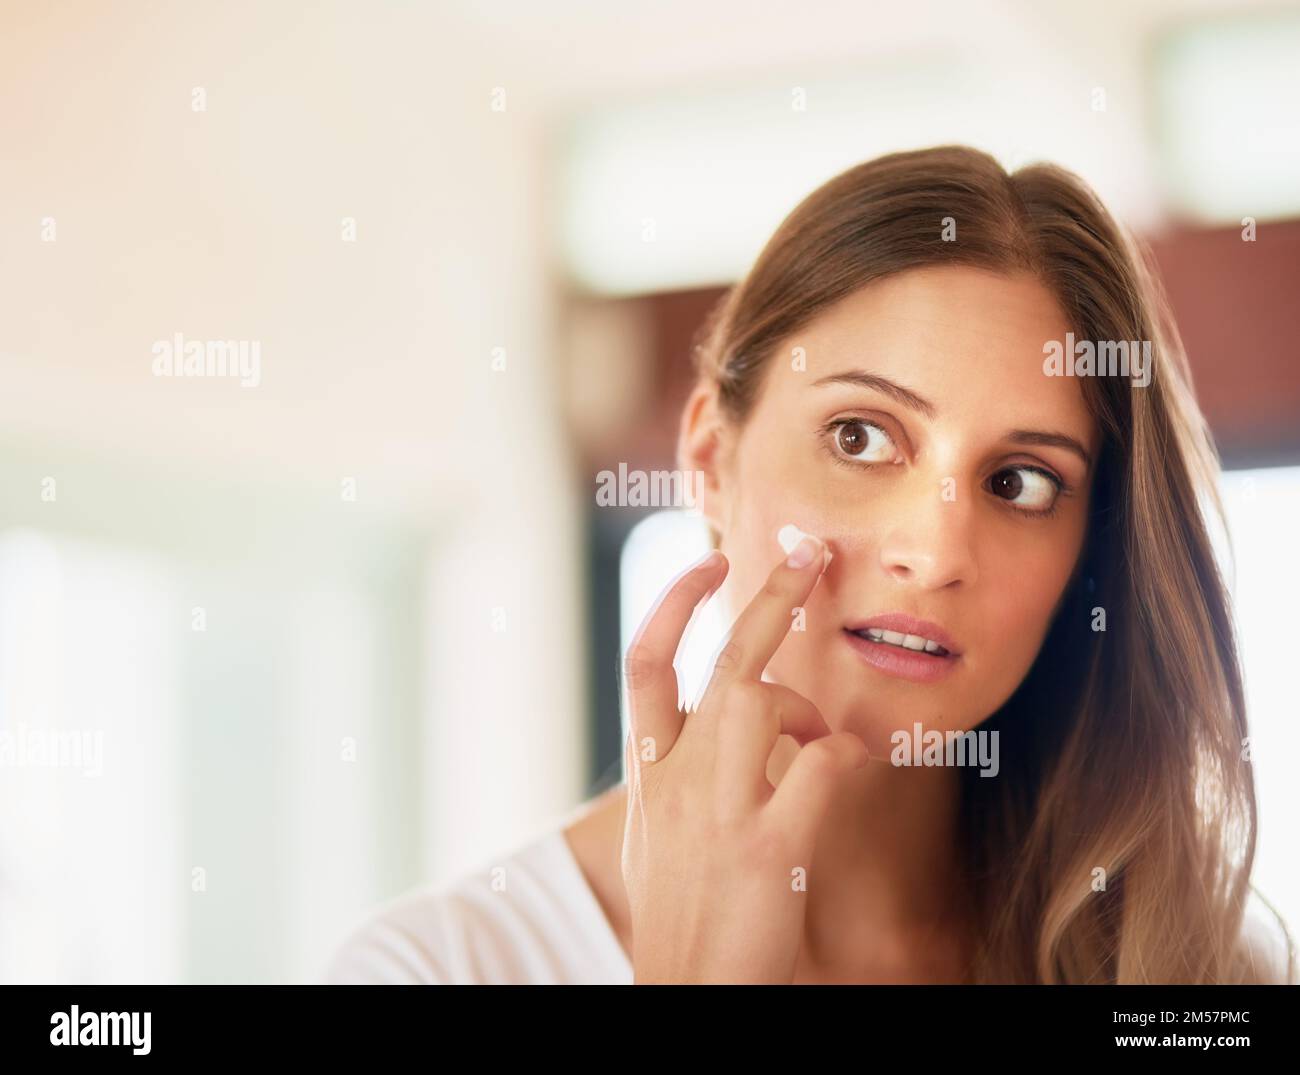 Cleanse, tone, and moisturise to protect your healthy skin. a young woman applying moisturiser to her face. Stock Photo